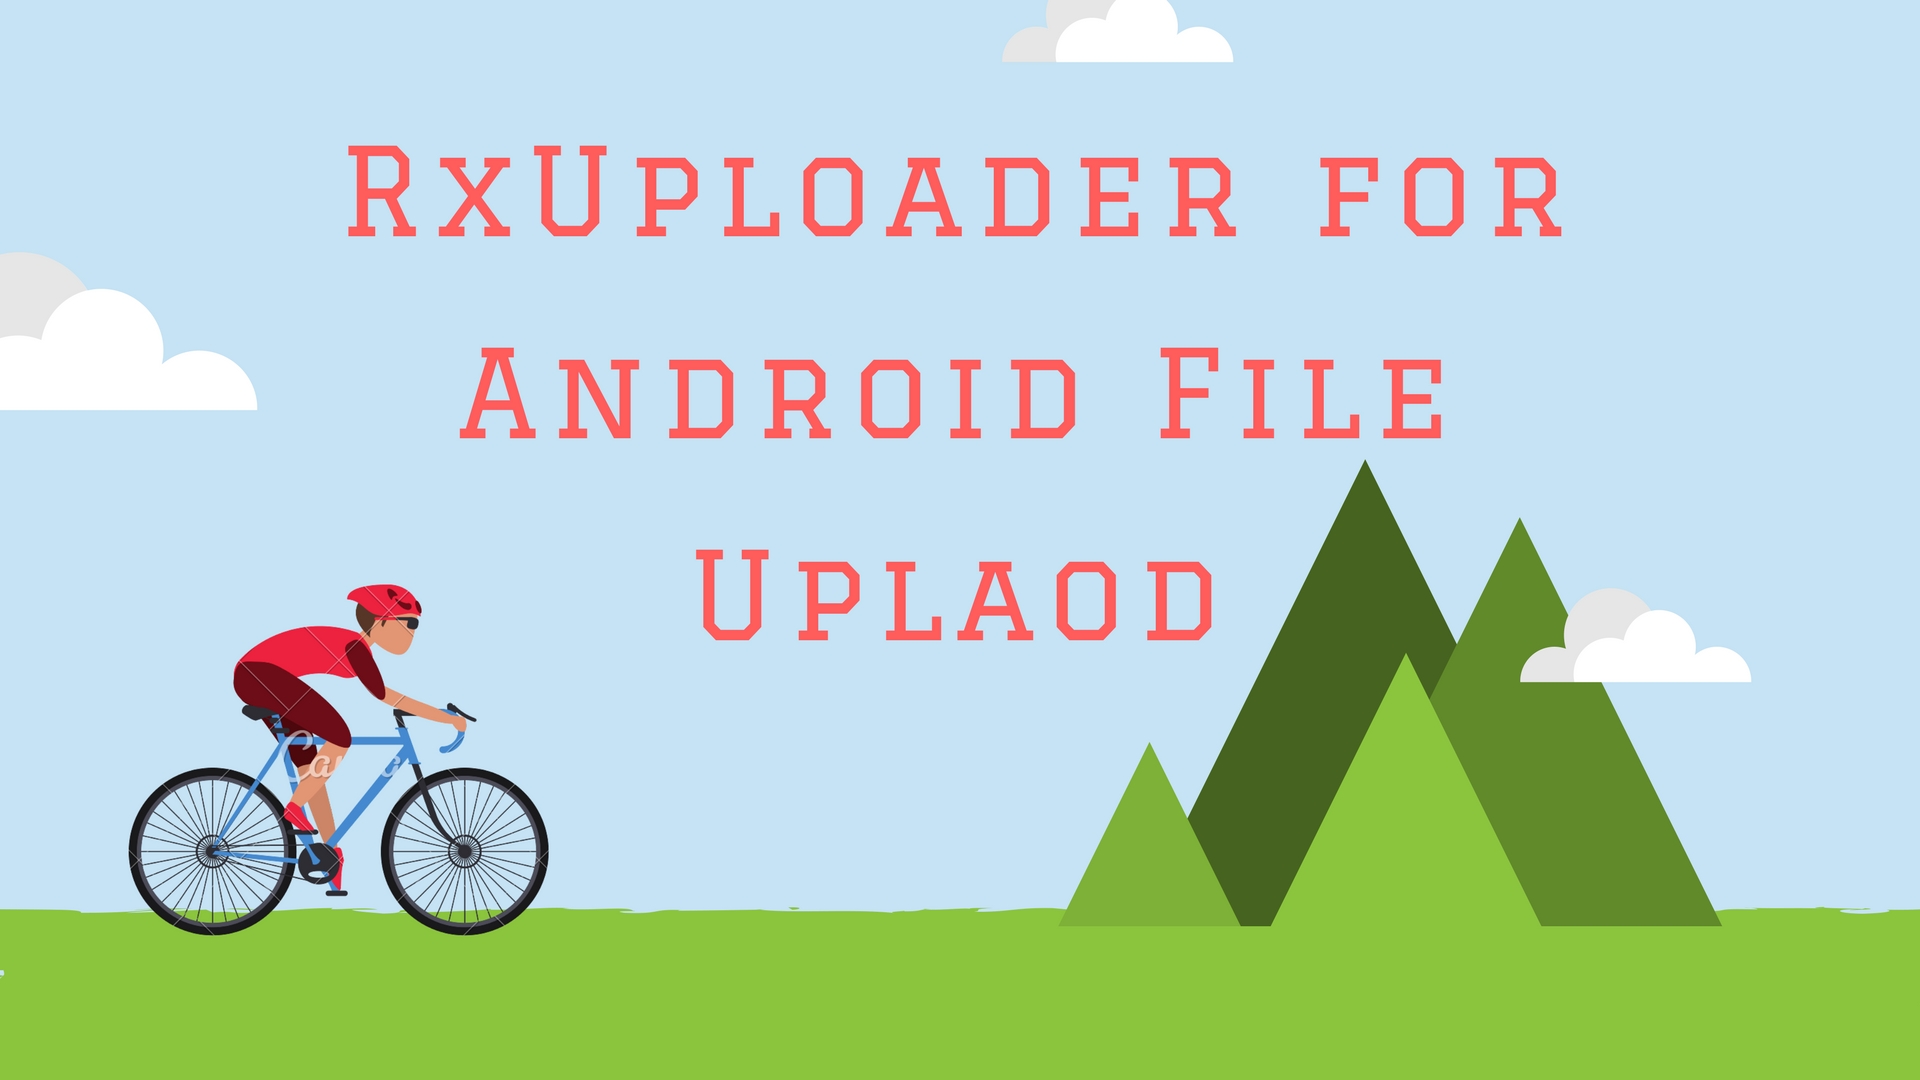 Uplaod a file by using RxUploader in Android